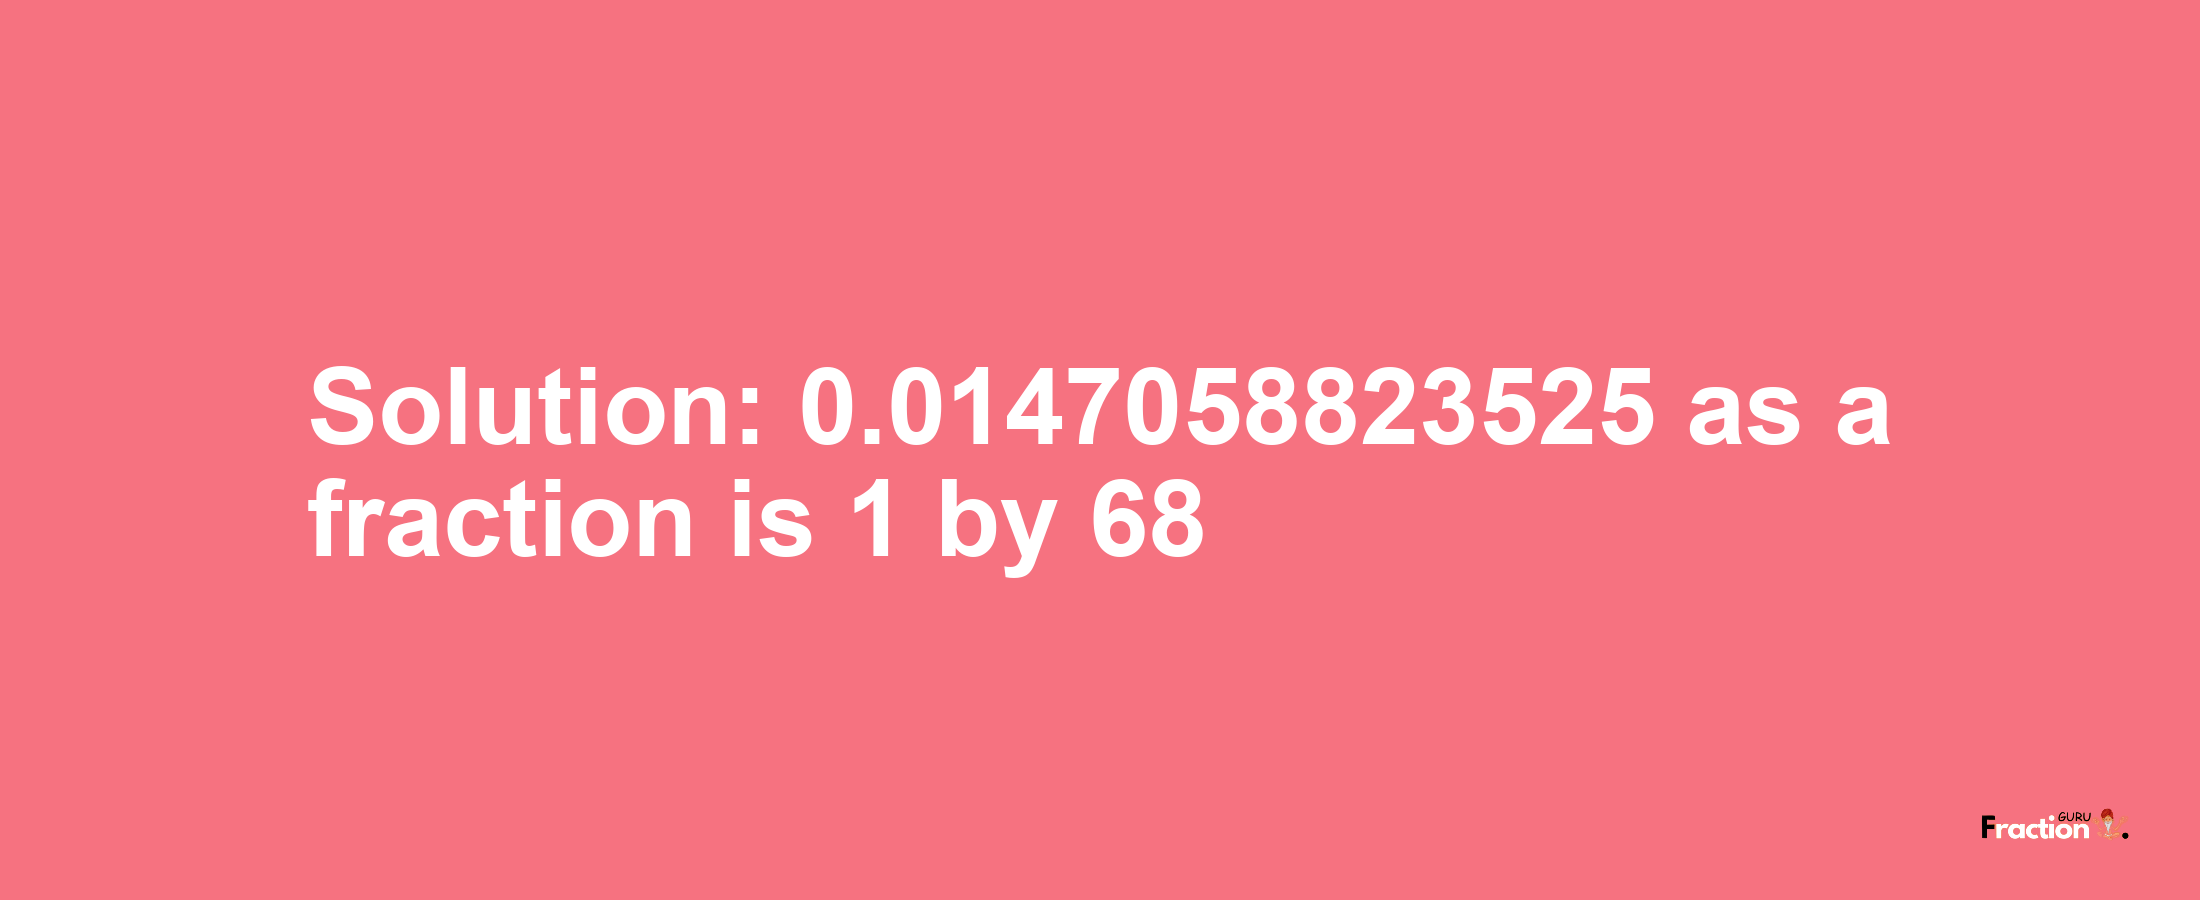 Solution:0.0147058823525 as a fraction is 1/68